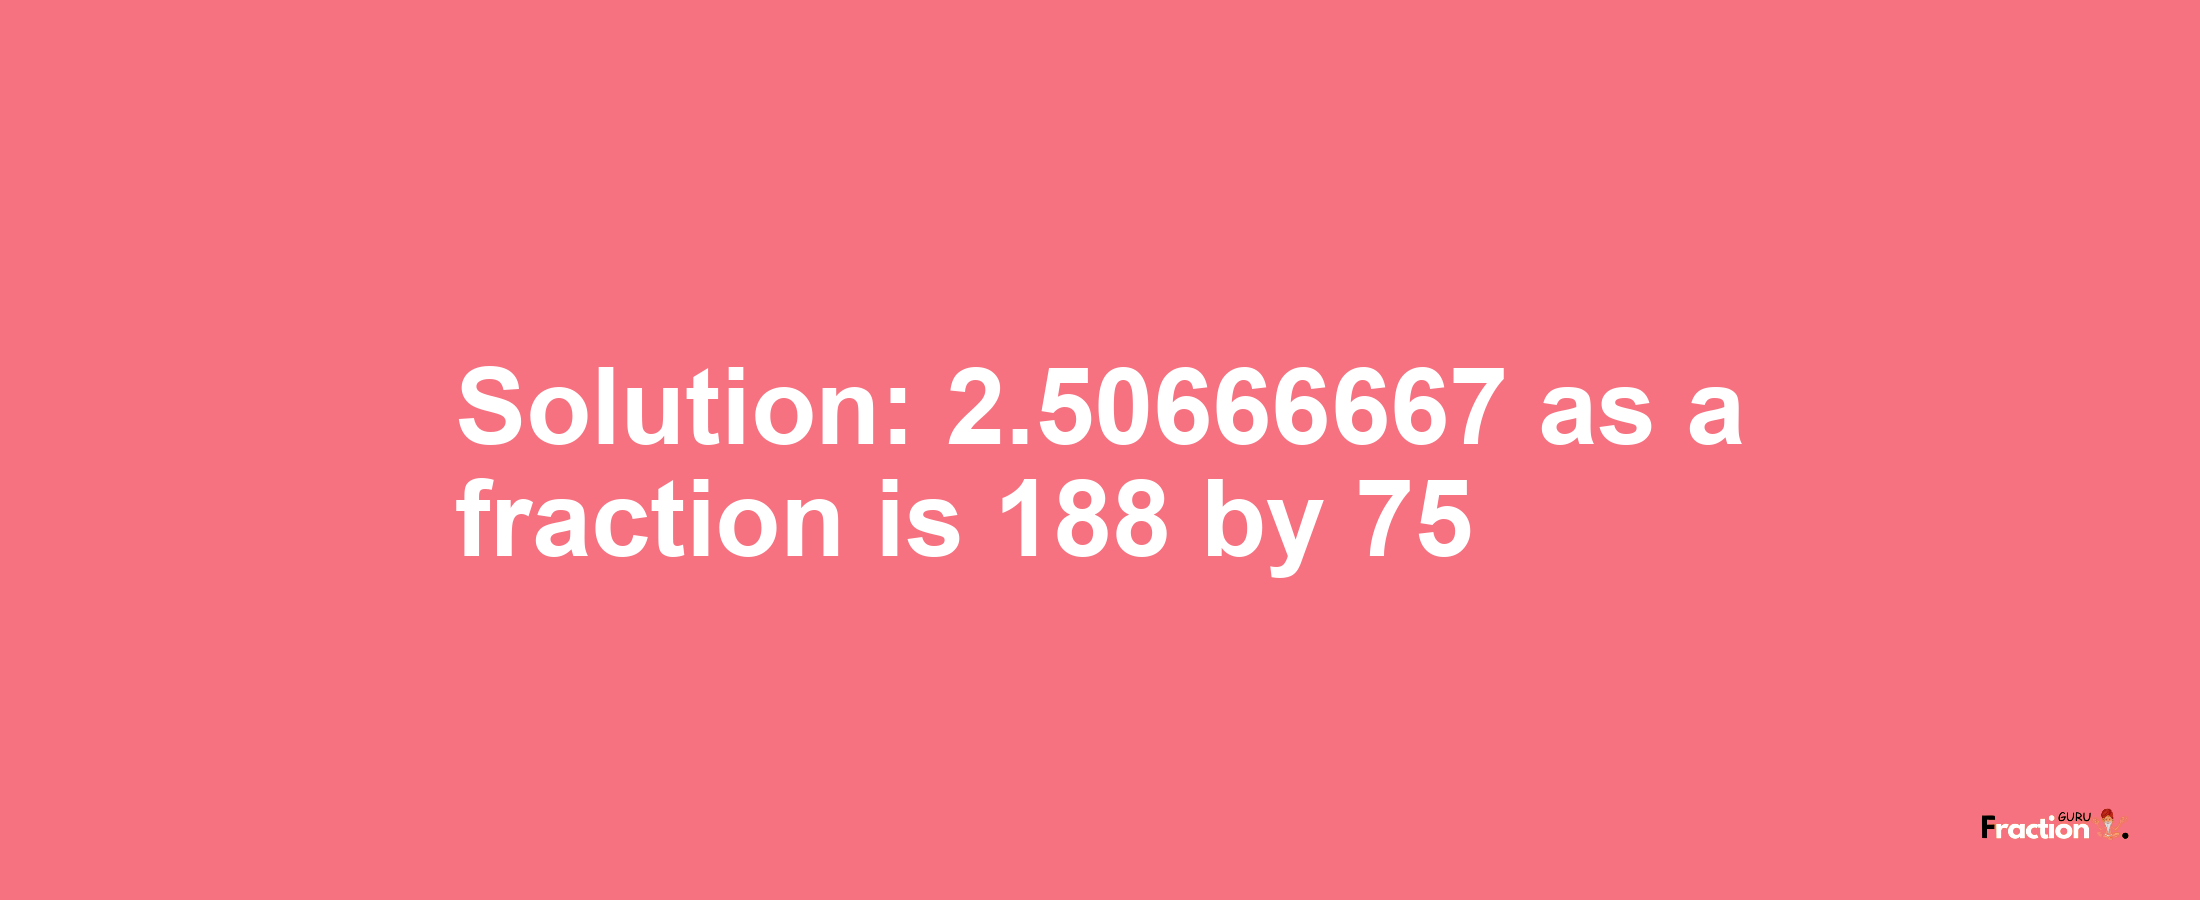 Solution:2.50666667 as a fraction is 188/75